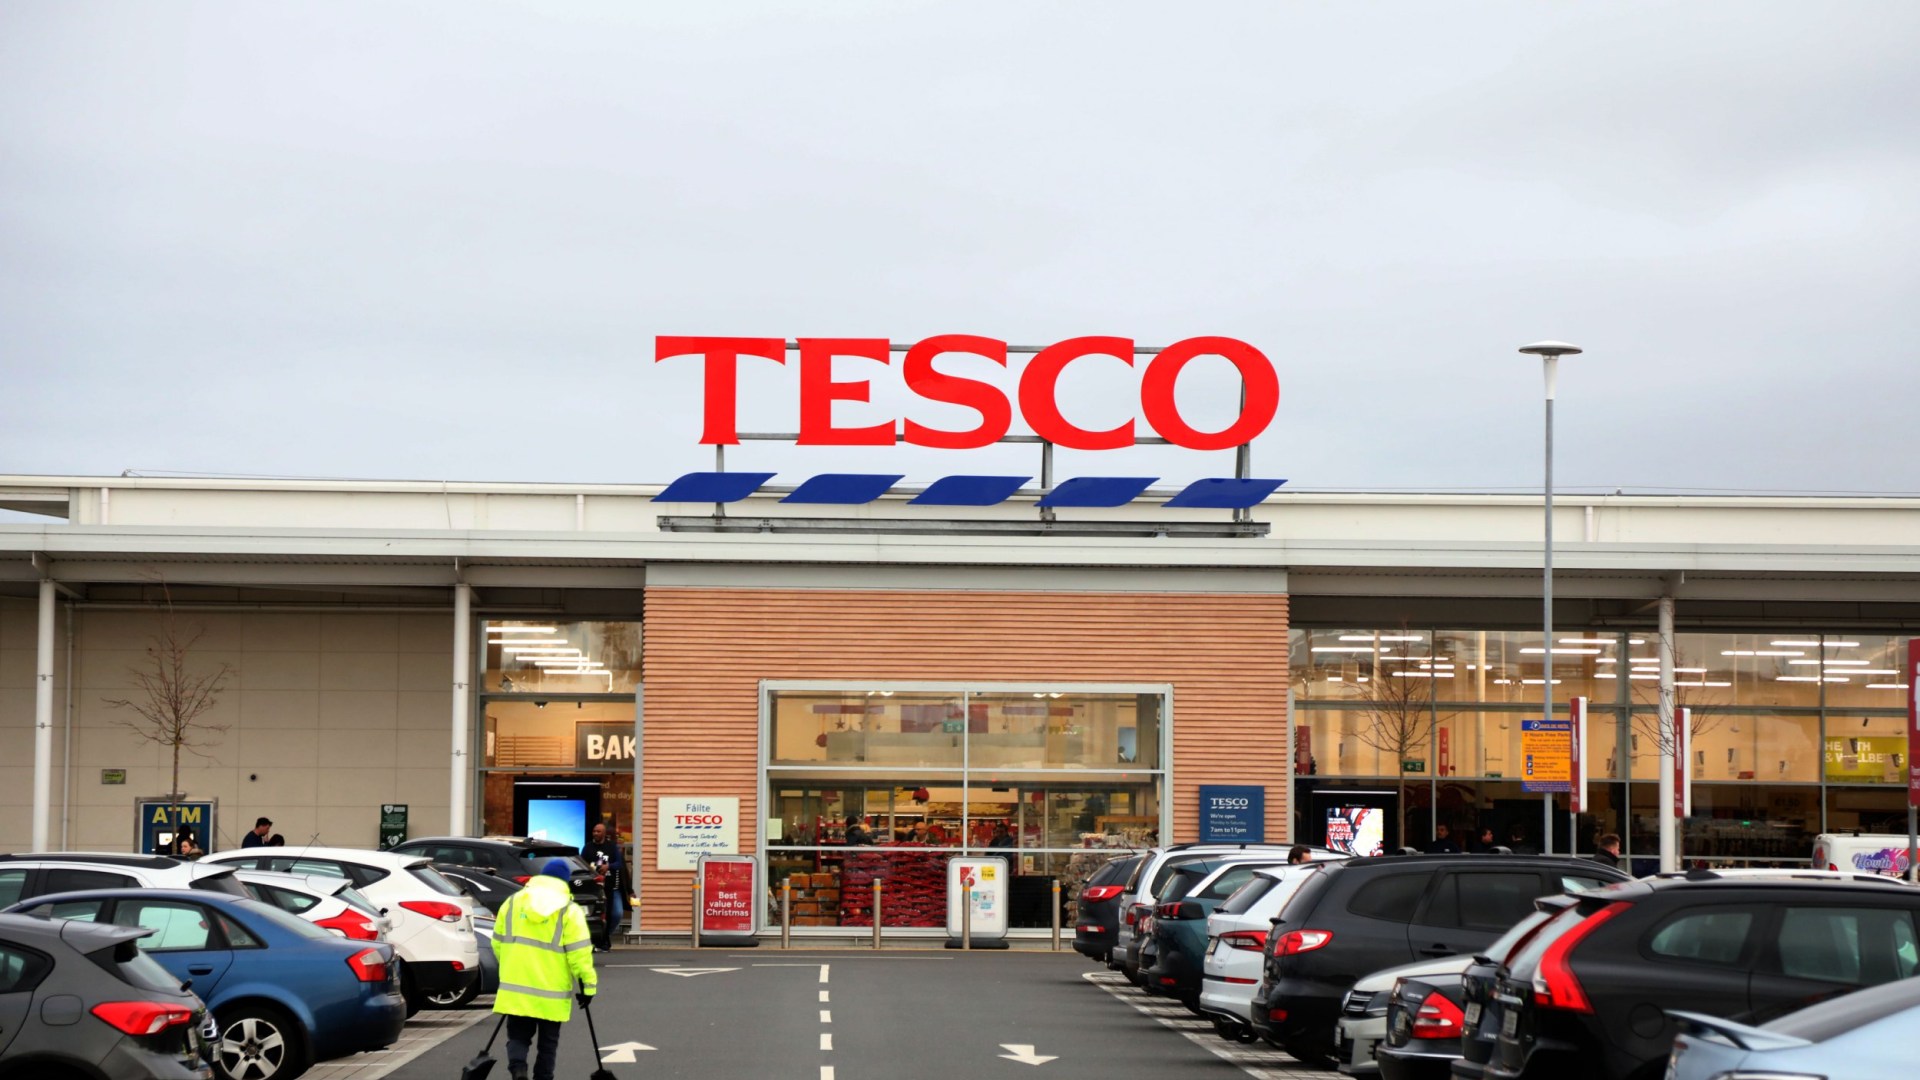 ‘Don’t eat’ – Urgent warning for Irish shoppers as popular Tesco product recalled over glass fears [Video]